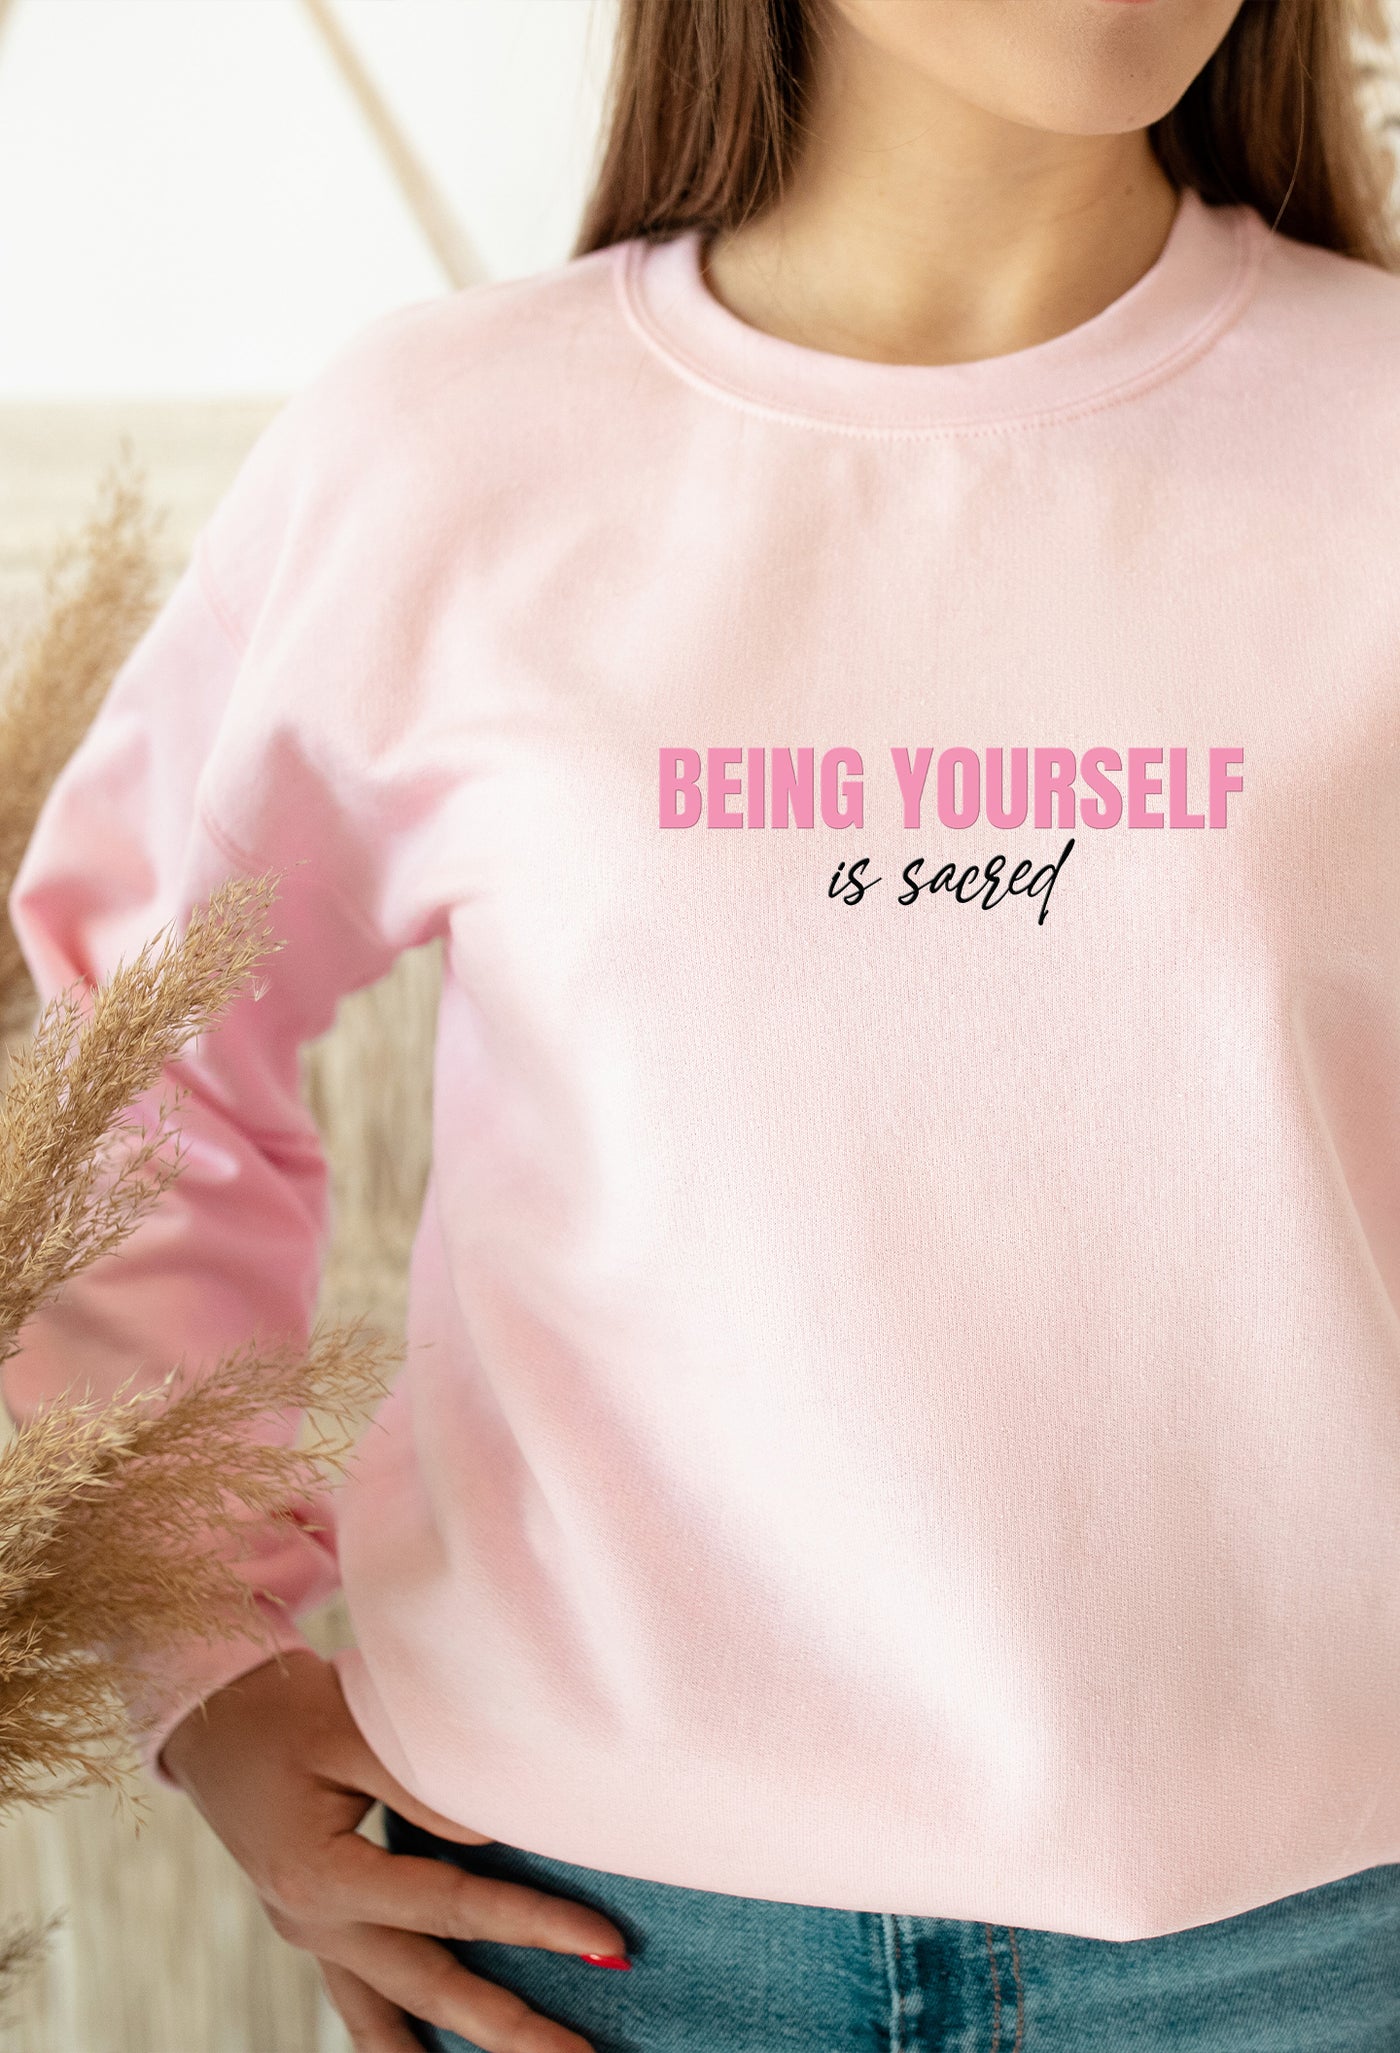 Being Yourself Sweater